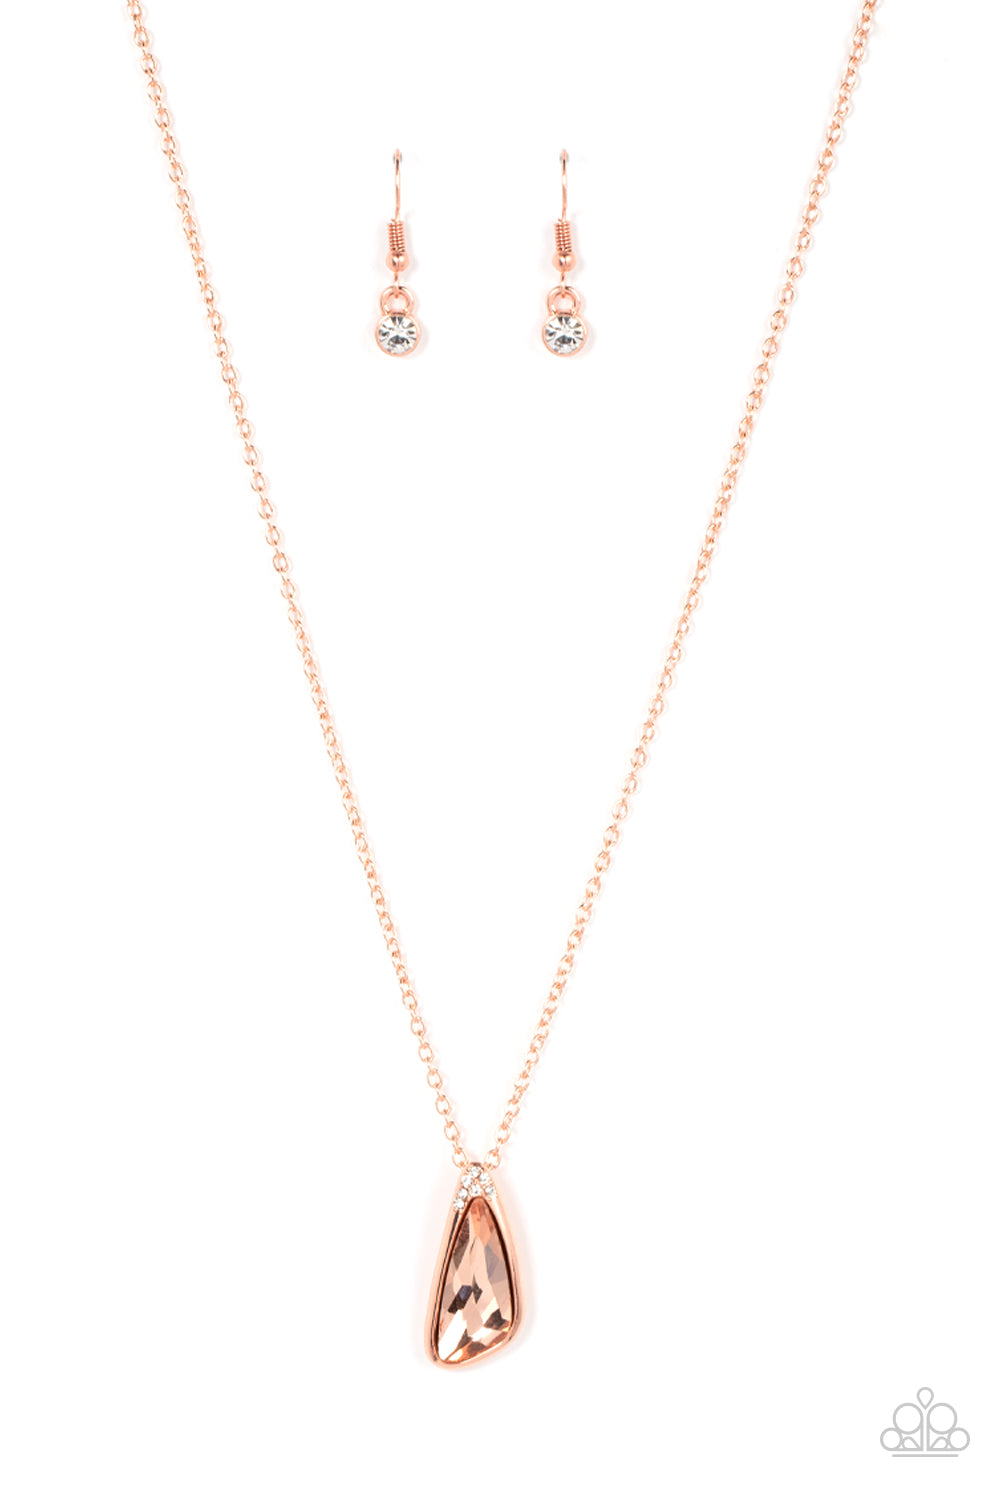 Envious Extravagance Necklace (Black, Red, Copper)